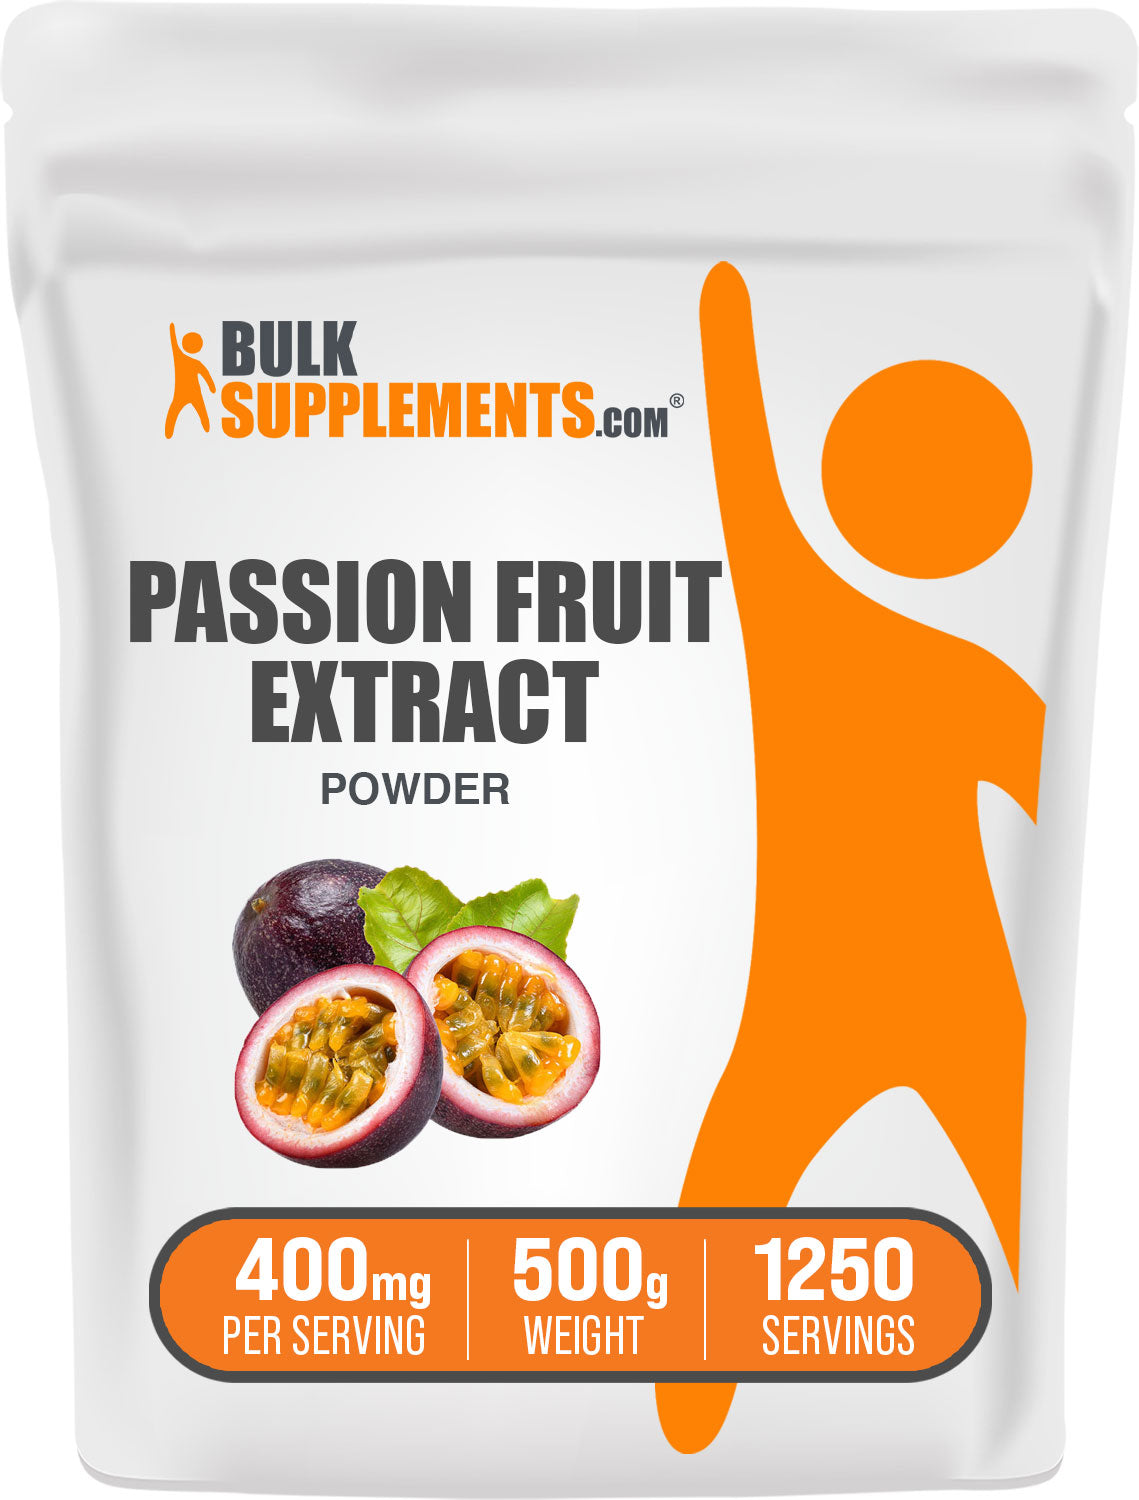 Passion Fruit Extract 500g Bag